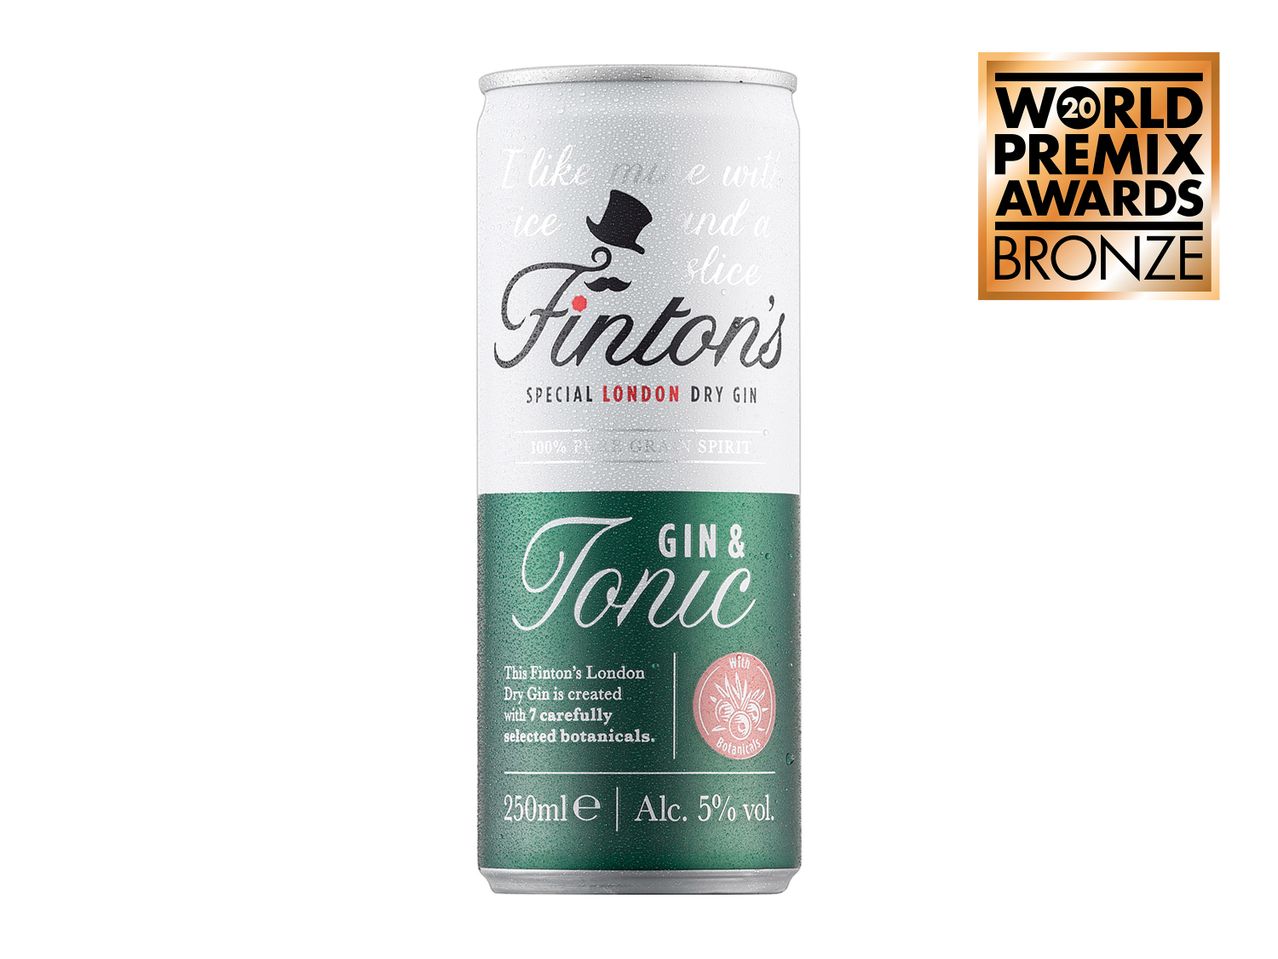 Go to full screen view: Finton's Special London Dry Gin & Tonic - Image 1